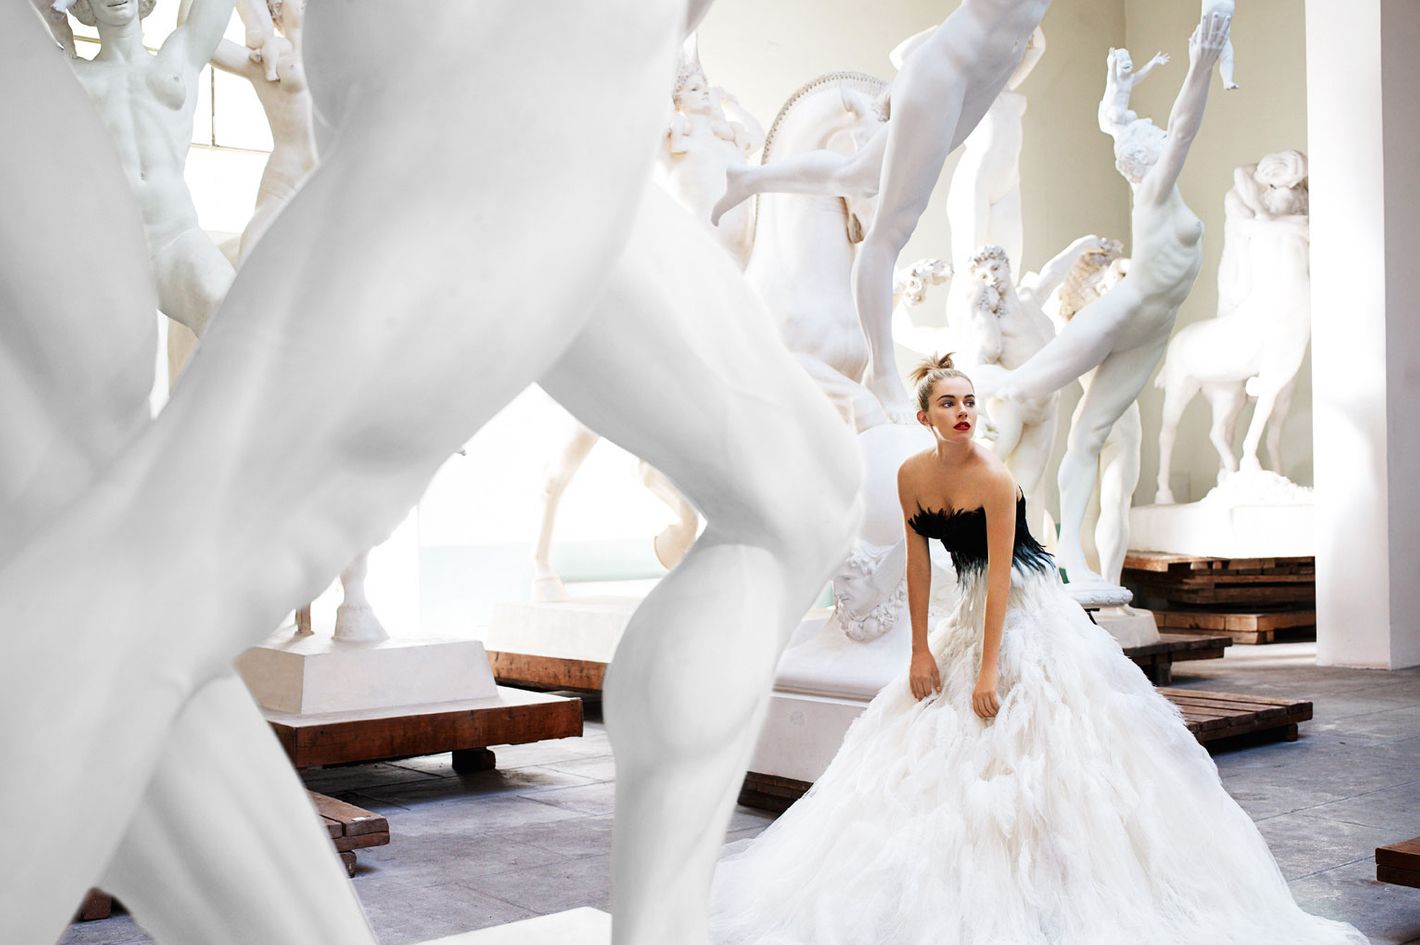 Exclusive First Looks: Mario Testino's 'In Your Face' Exhibit